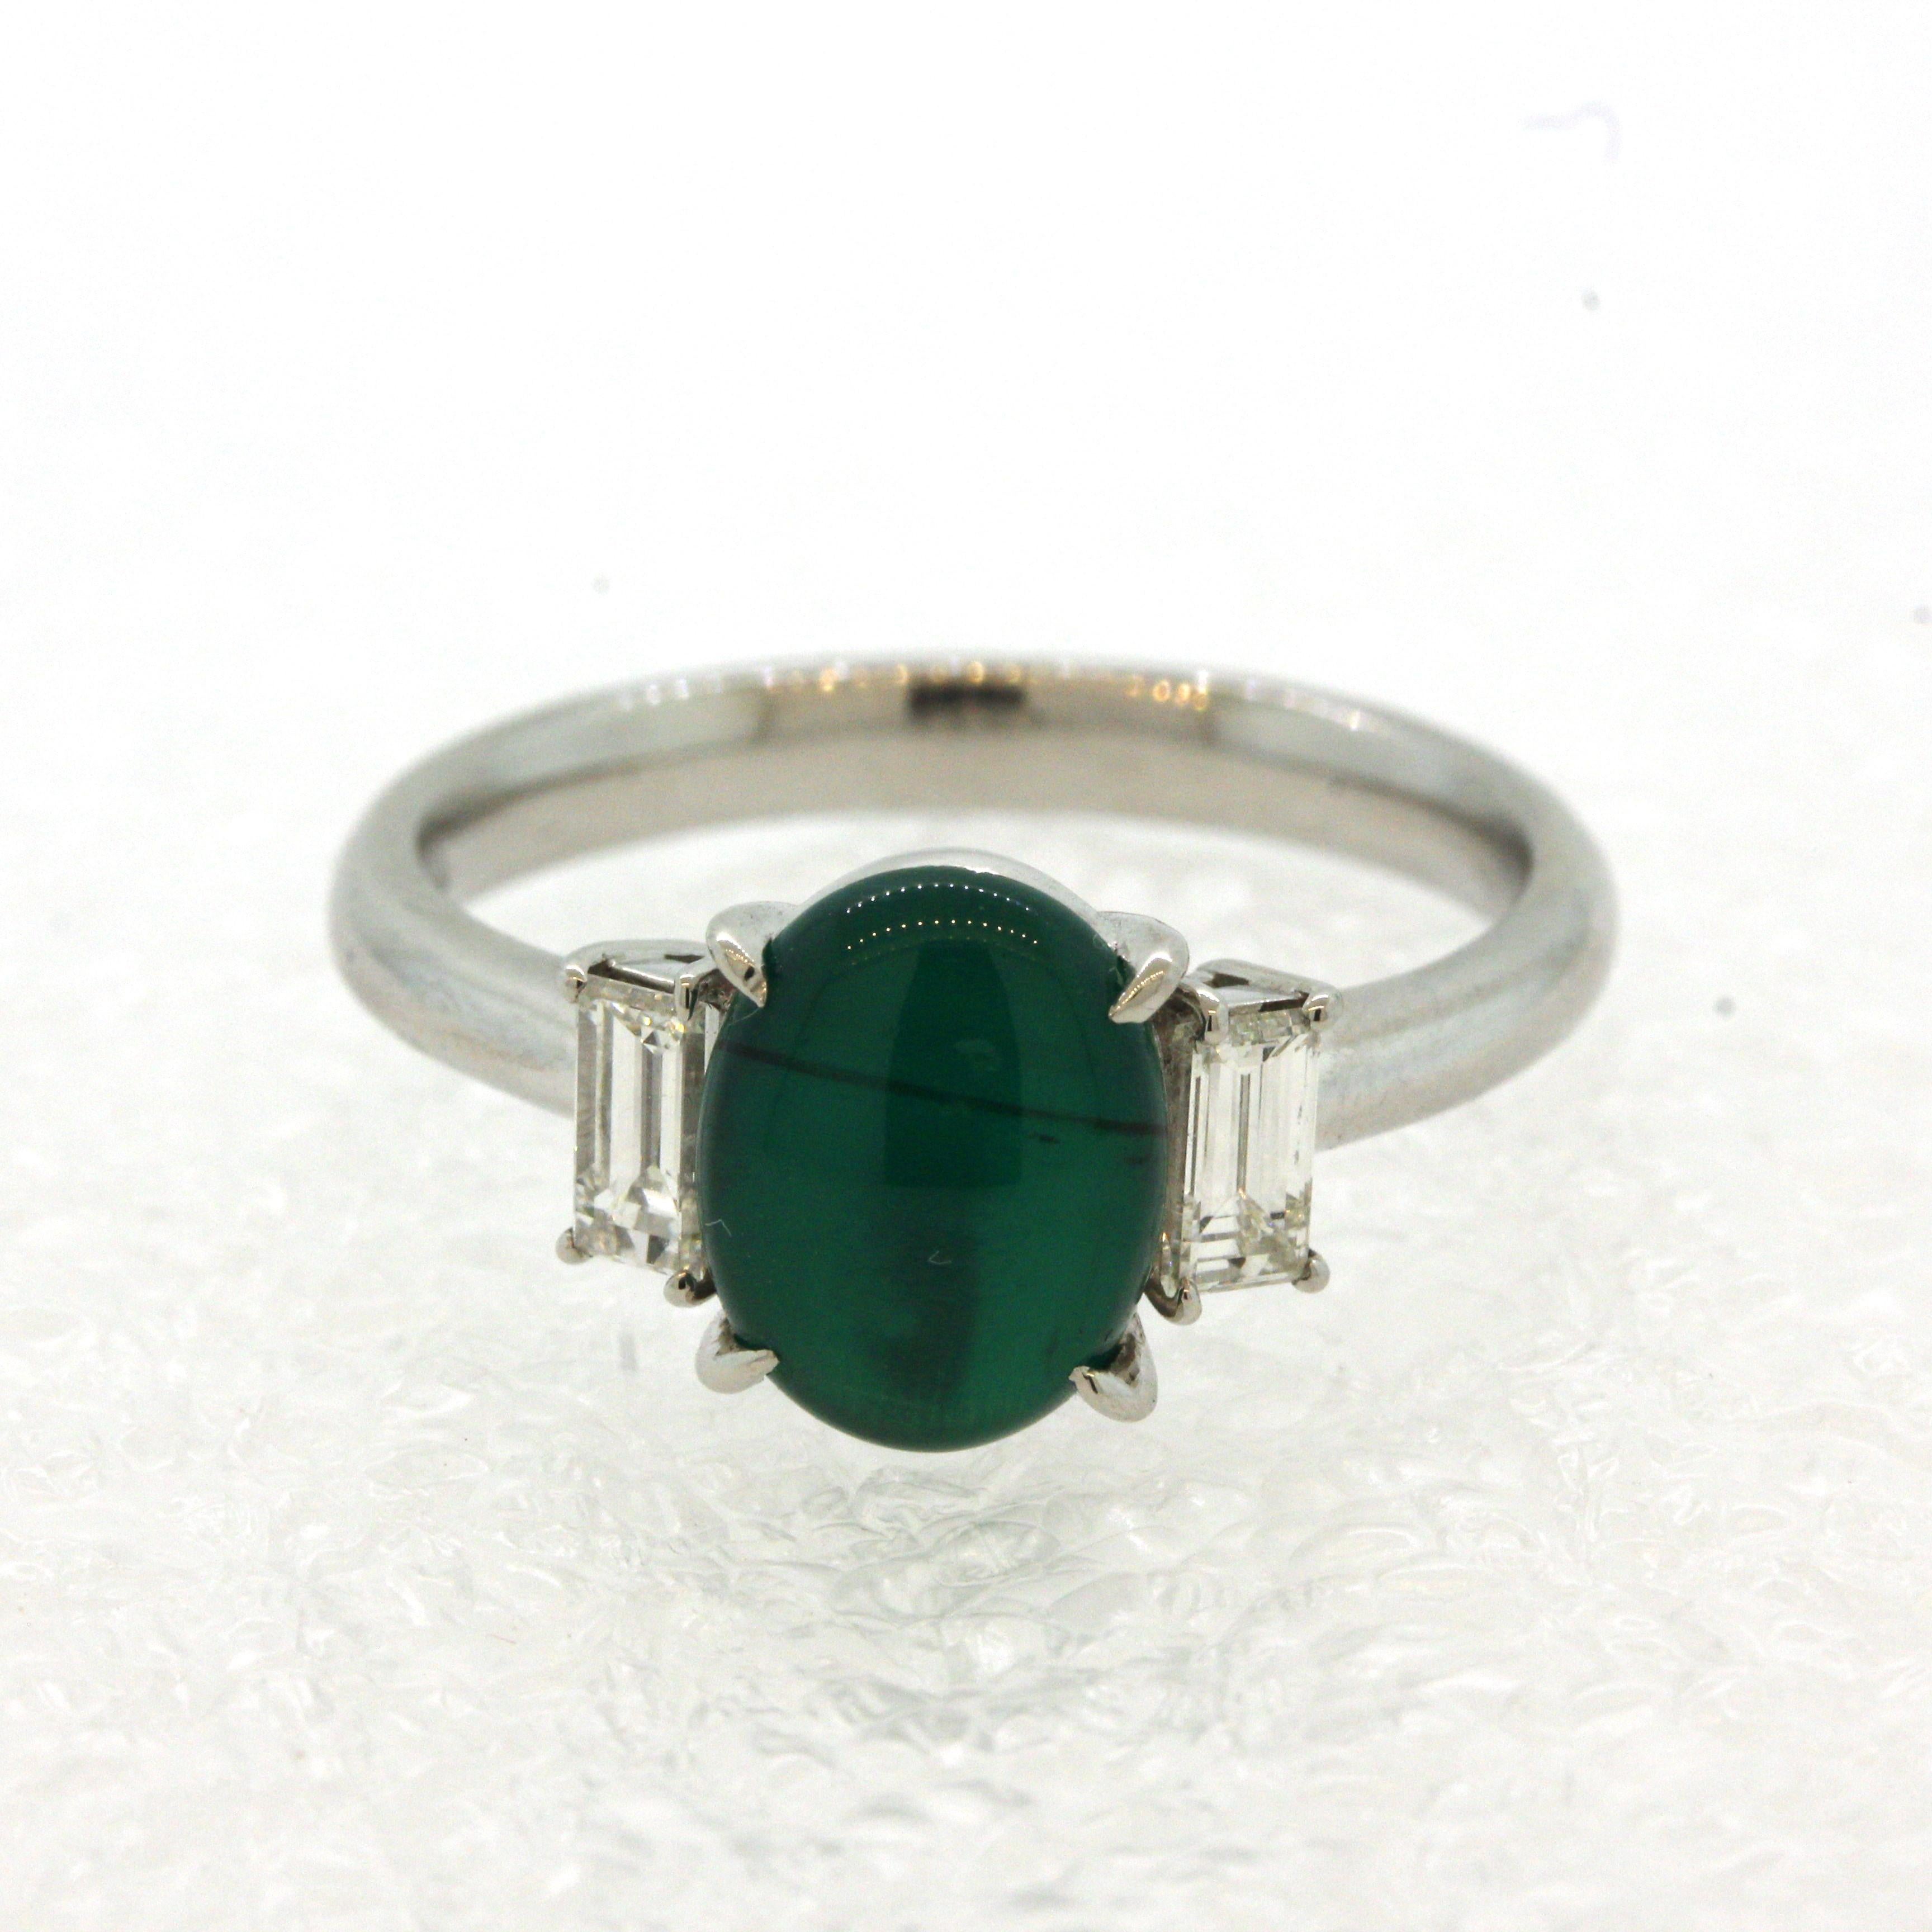 A superb and rare gem emerald with a strong cats eye! The emerald weighs a respectable 1.60 carats and has an incredible vivid green color which is so strong it looks fake! Adding to that, the stone has a strong chatoyant line (cats eye) when a